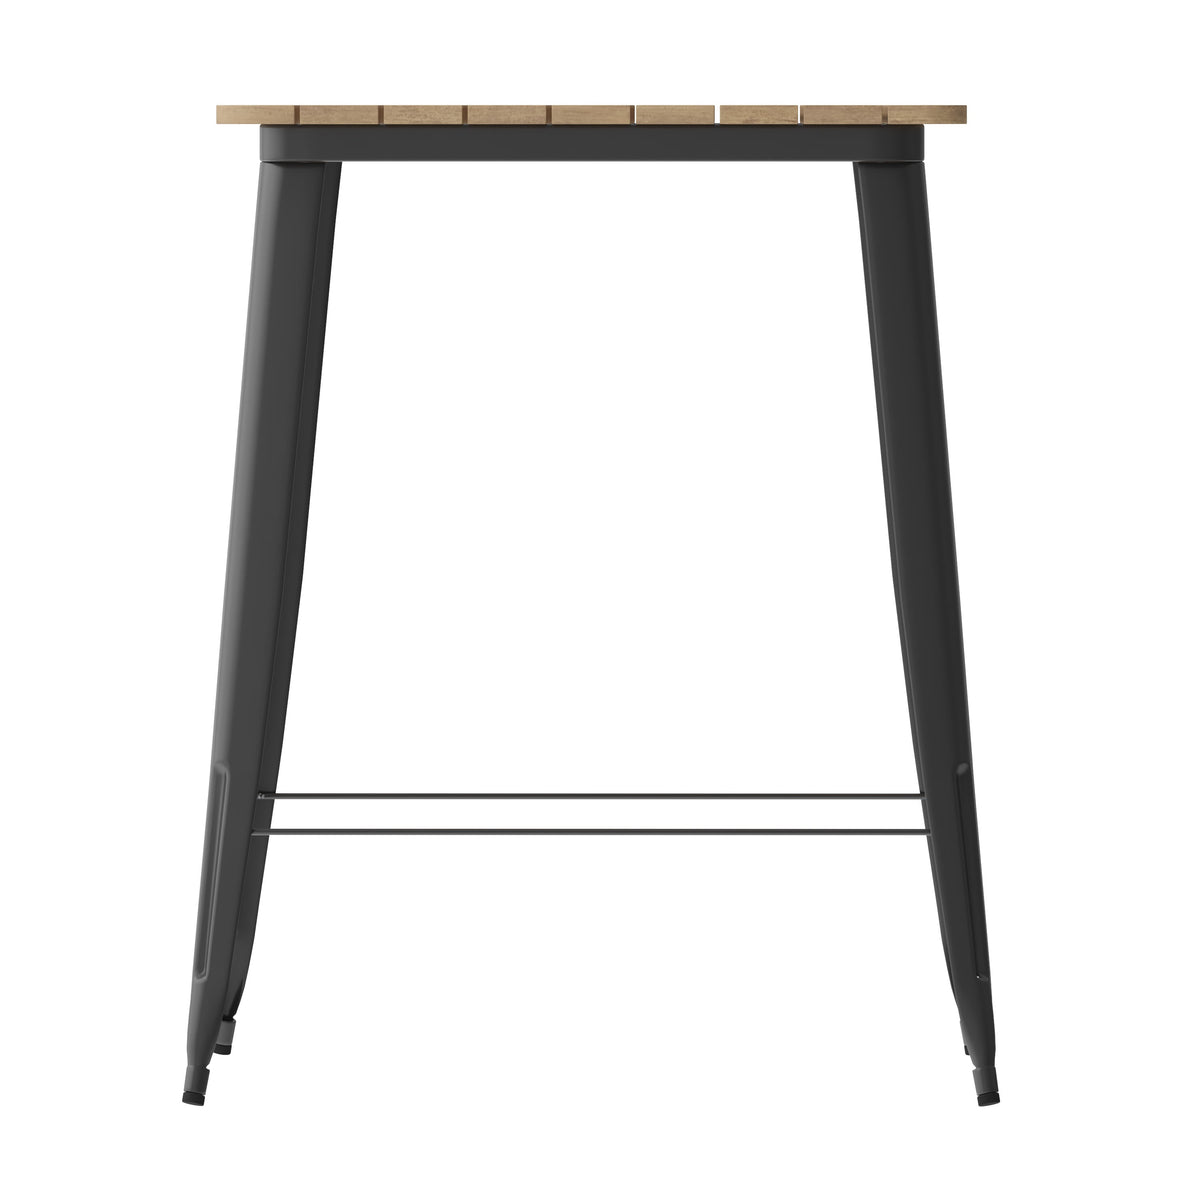 Brown/Black |#| 31.5inch SQ Commercial Poly Bar Top Restaurant Table with Steel Frame-Brown/Black